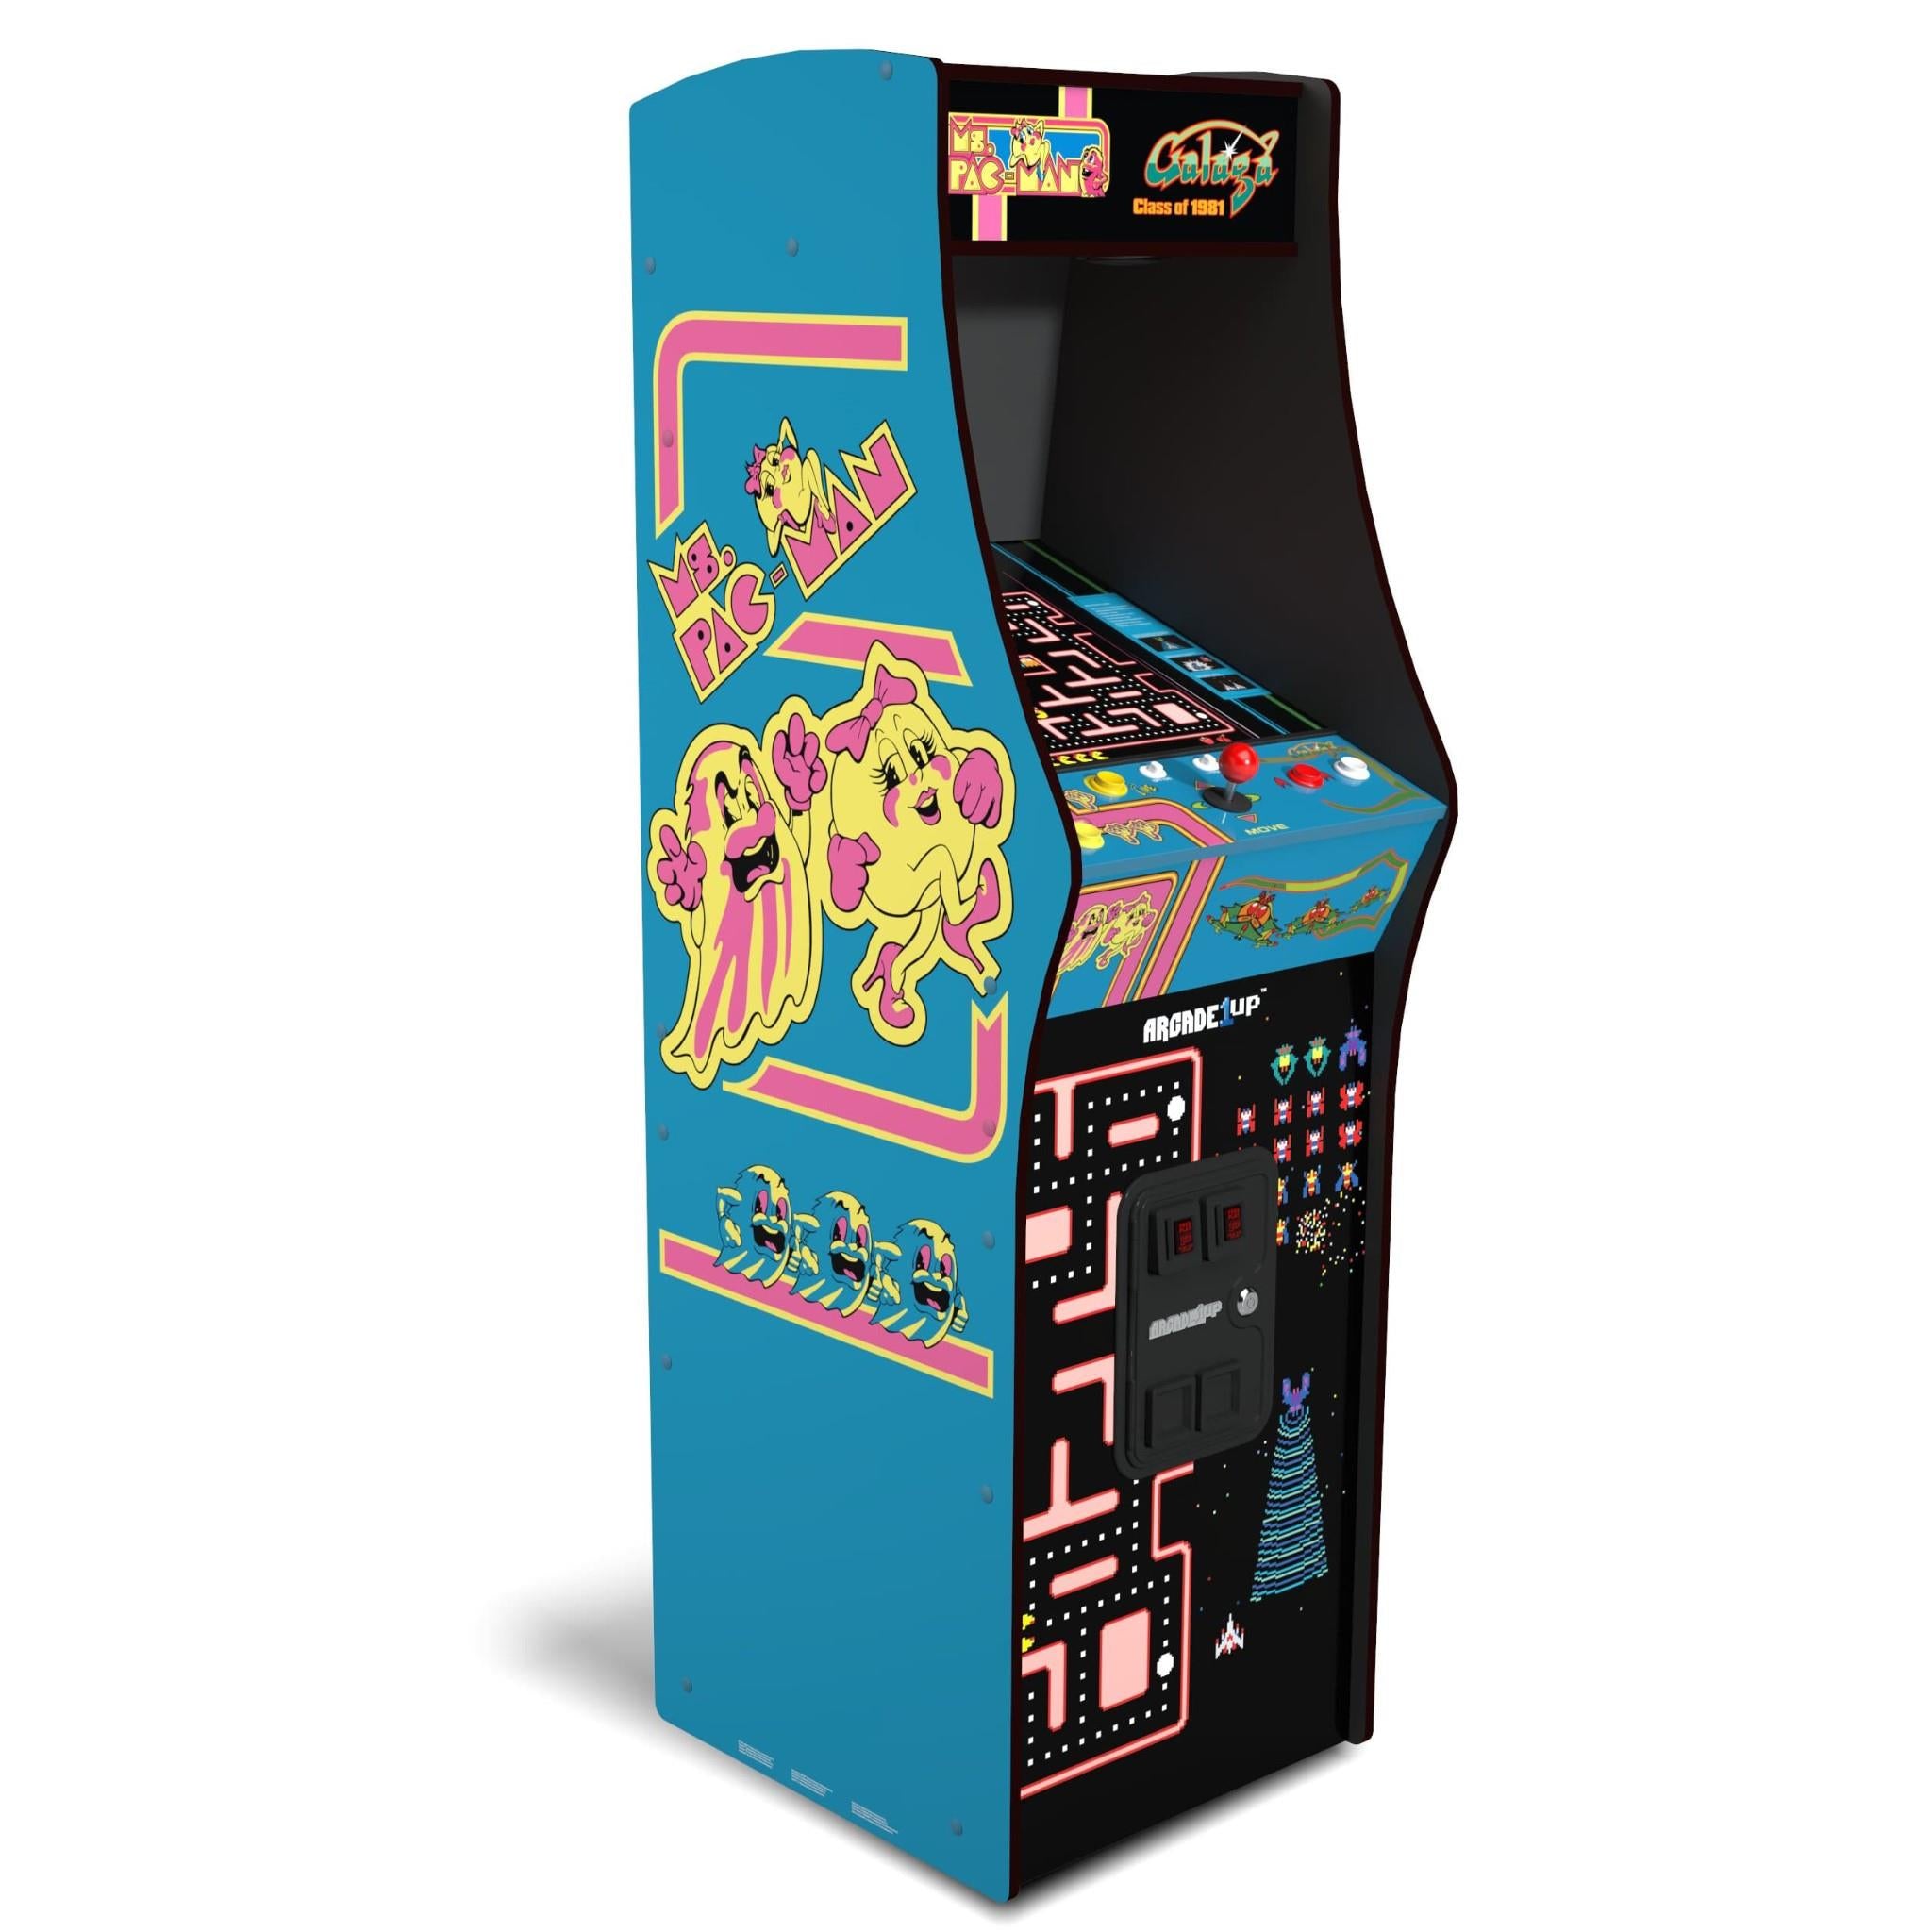 Arcade 1Up Joust 14-in-1 Midway Legacy Edition Arcade With Licensed Riser  And Light-up Marquee, Arcade1up & Reviews